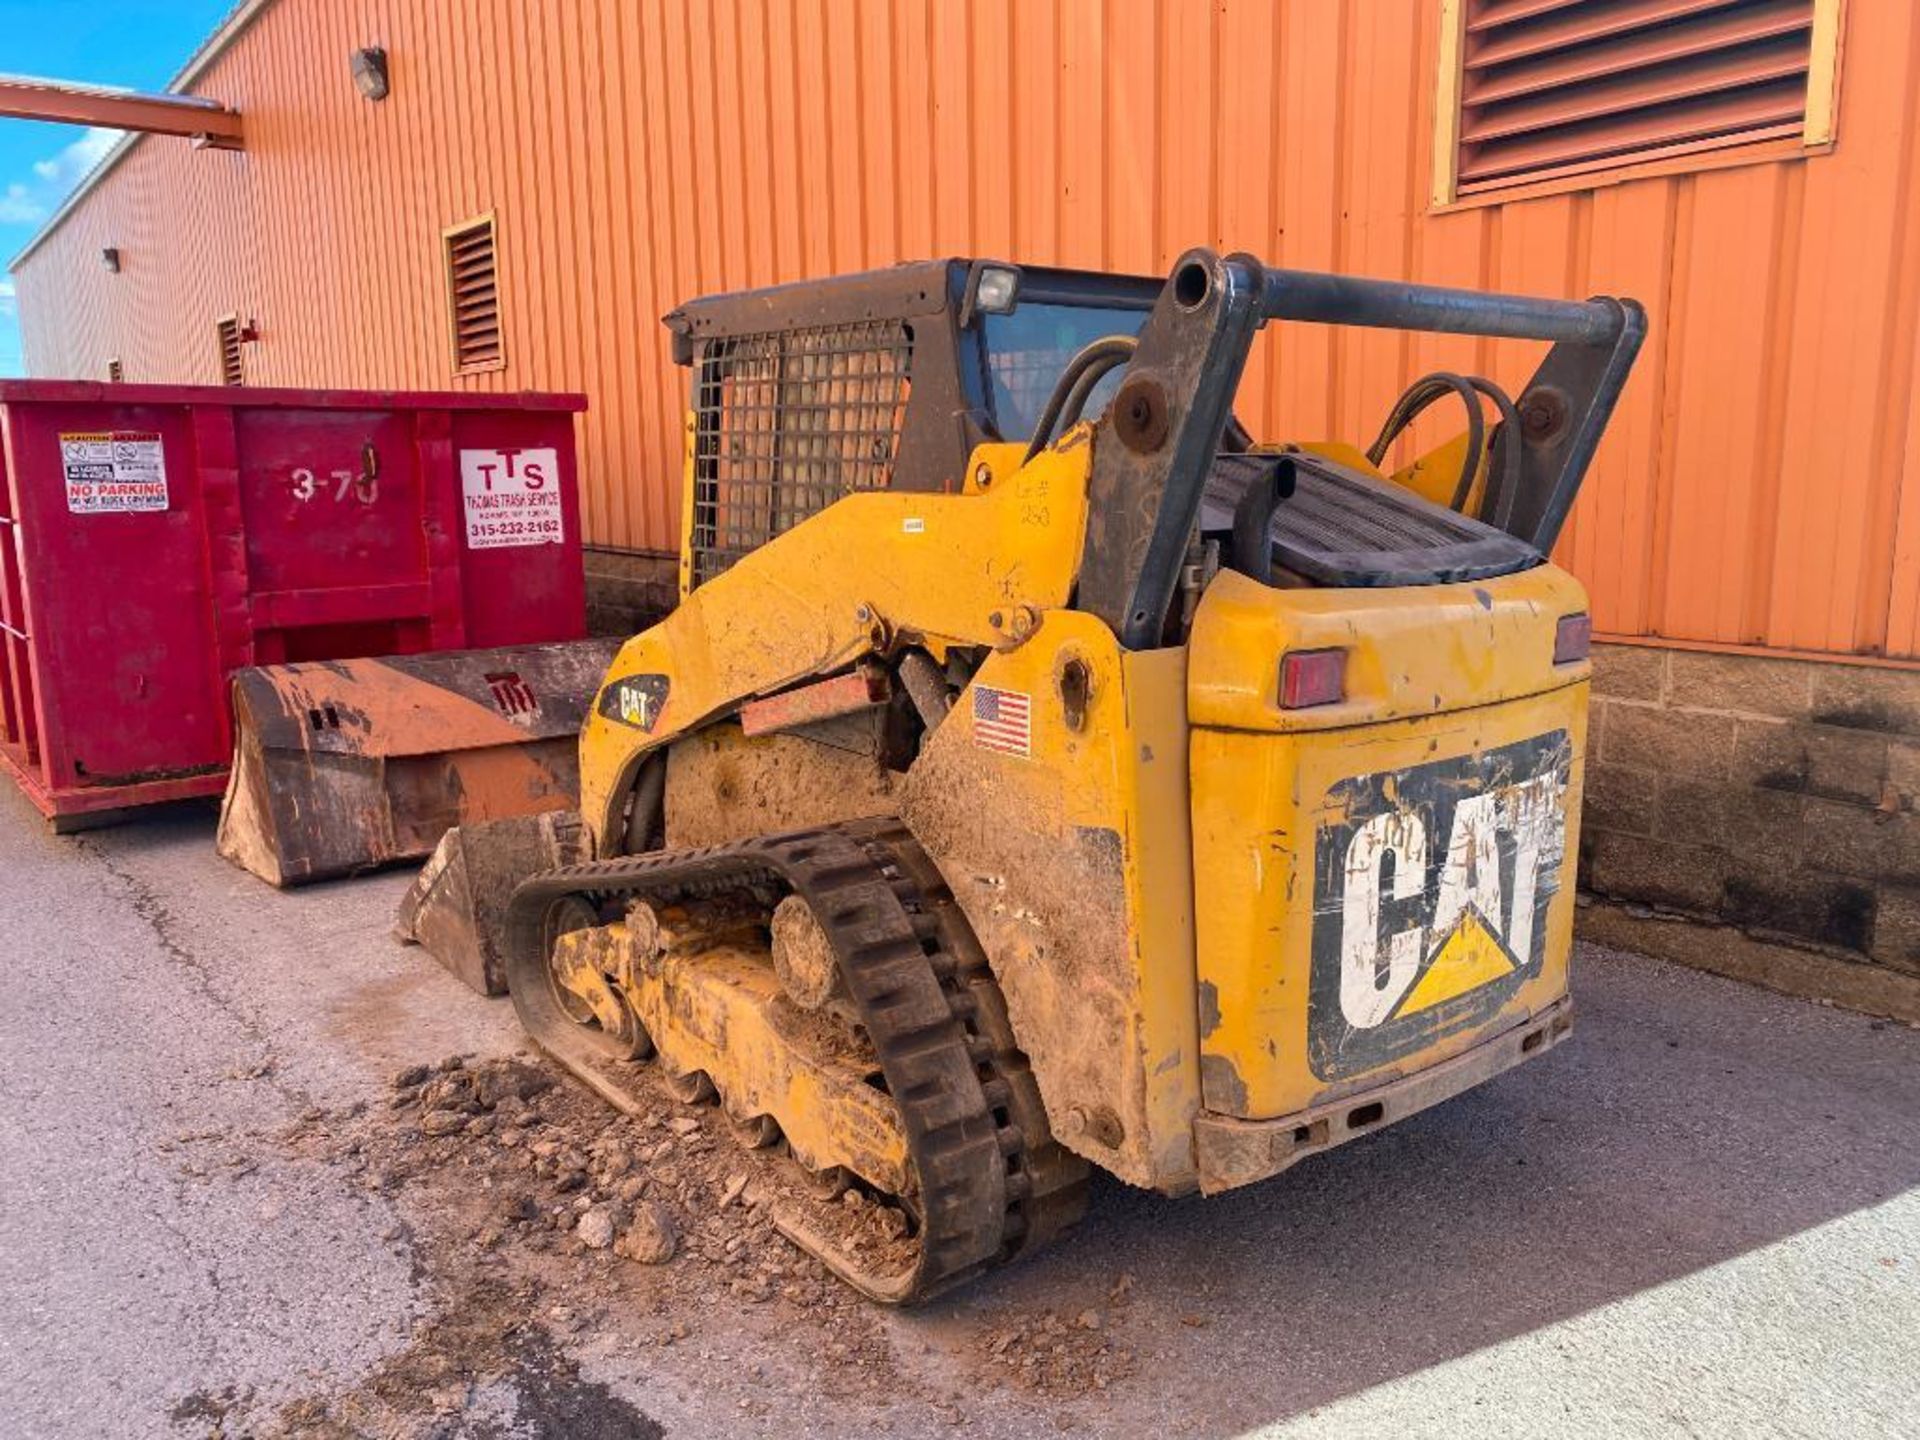 2012 Caterpillar 259B3 Compact Track Loader Skid Steer w/ rubber tracks, 4,596 hours, PIN CAT0259BJY - Image 5 of 13